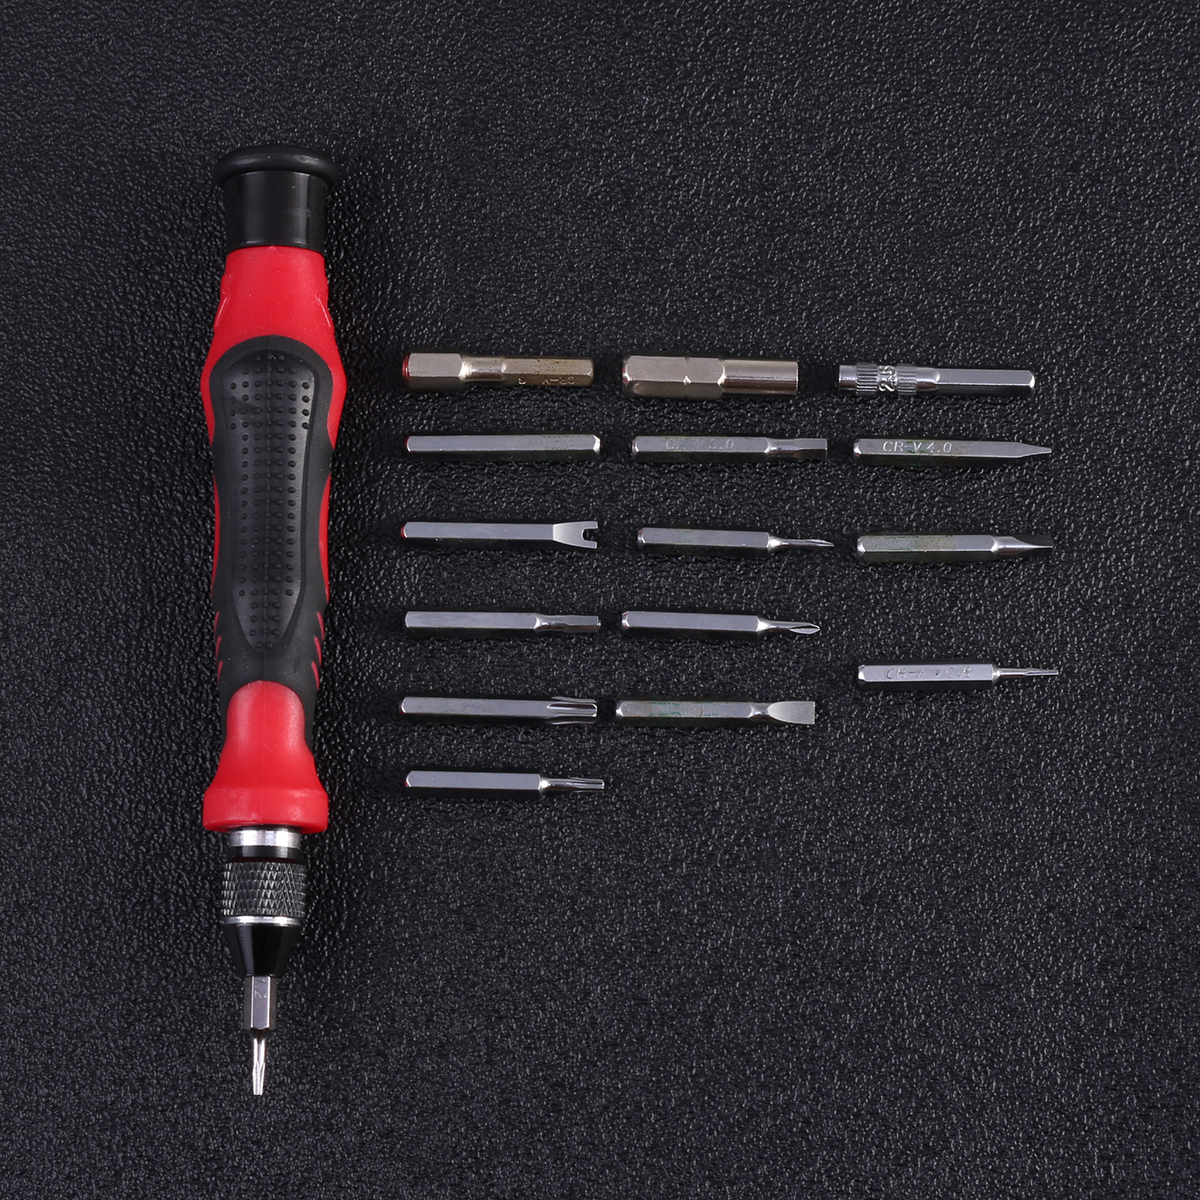 59-in-1-Mini-DC-36V-Electric-Power-Screwdriver-Set-Cordless-Screwdriver-Household-Home-Tool-1870612-3